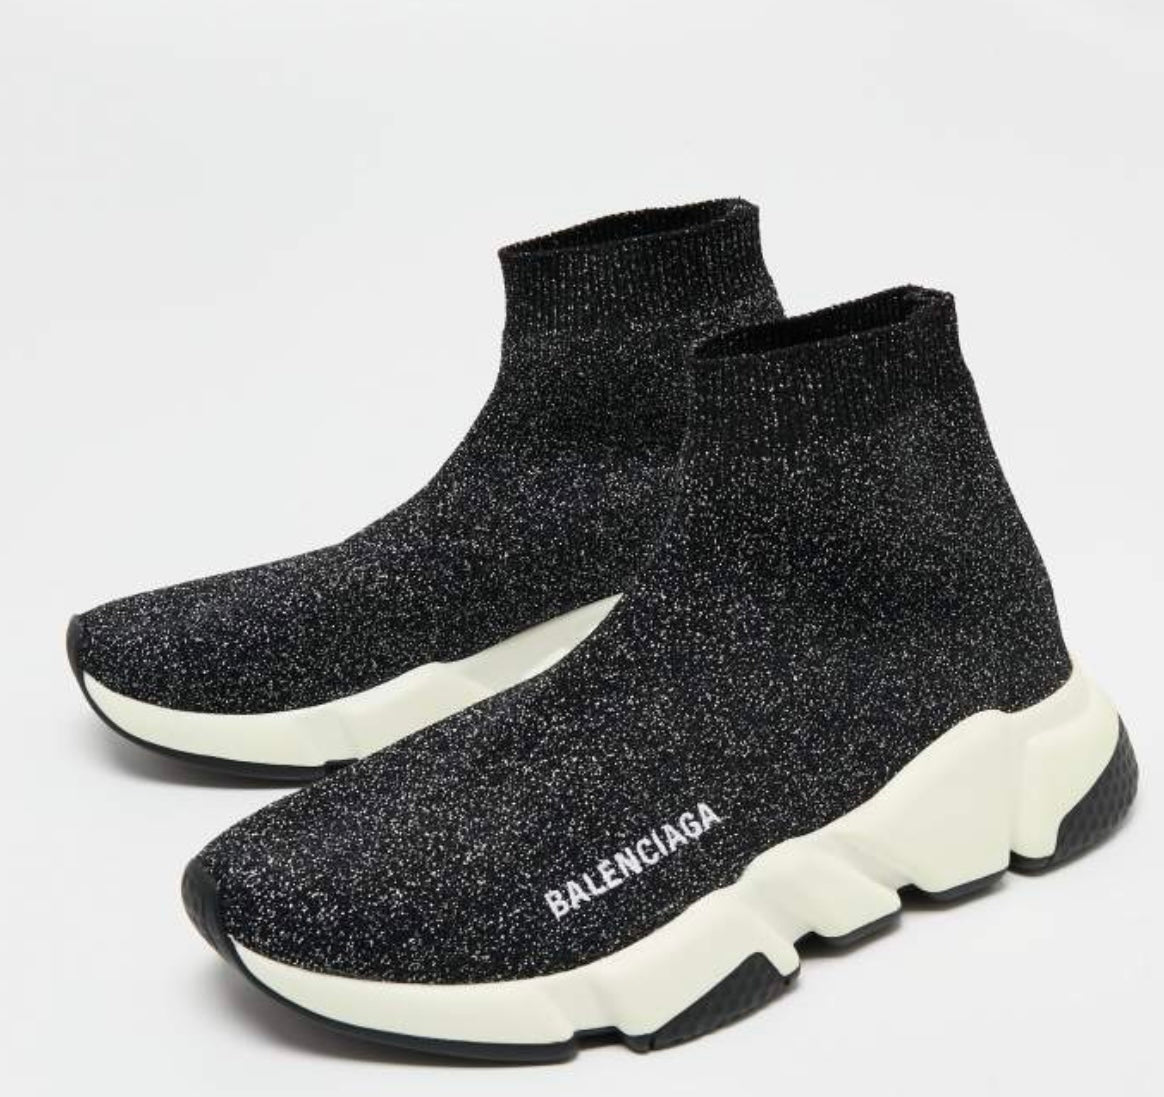 Balenciaga Black/Silver Glitter Knit Fabric Speed Trainer High-Top Sneakers